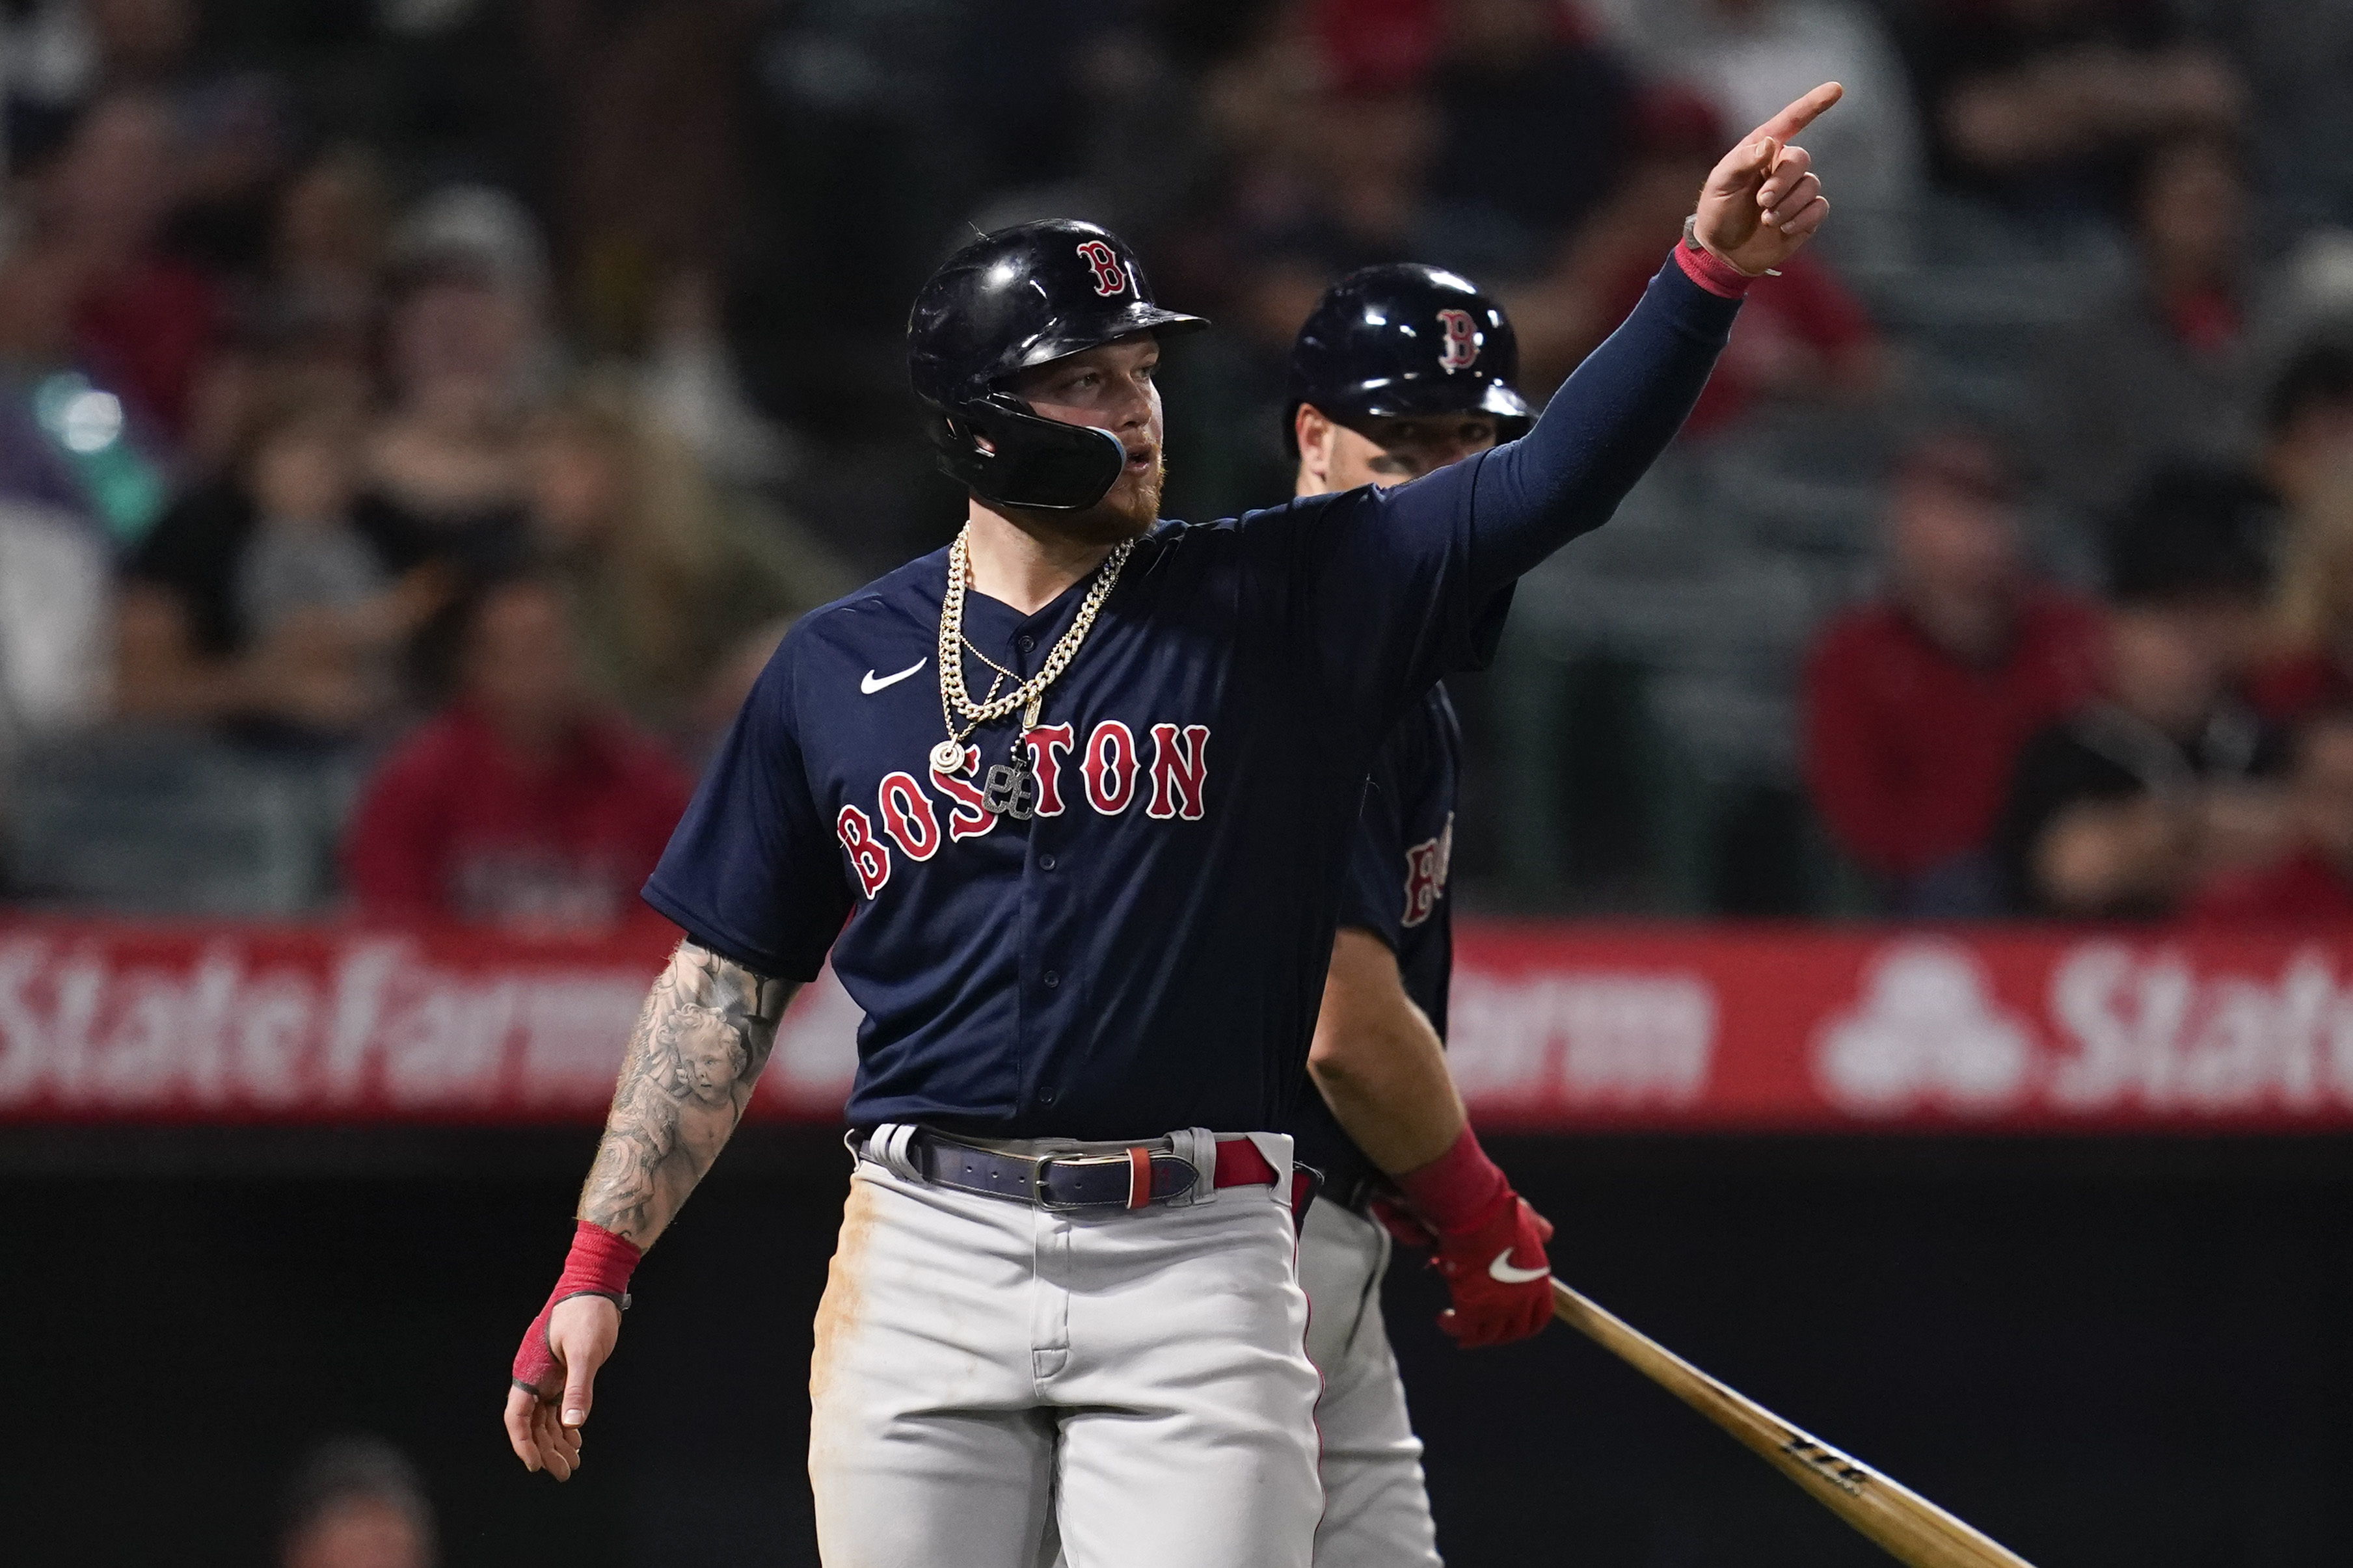 Mastrodonato: After feeling the negativity in his rookie year, Red Sox 1B Bobby  Dalbec is slowing things down